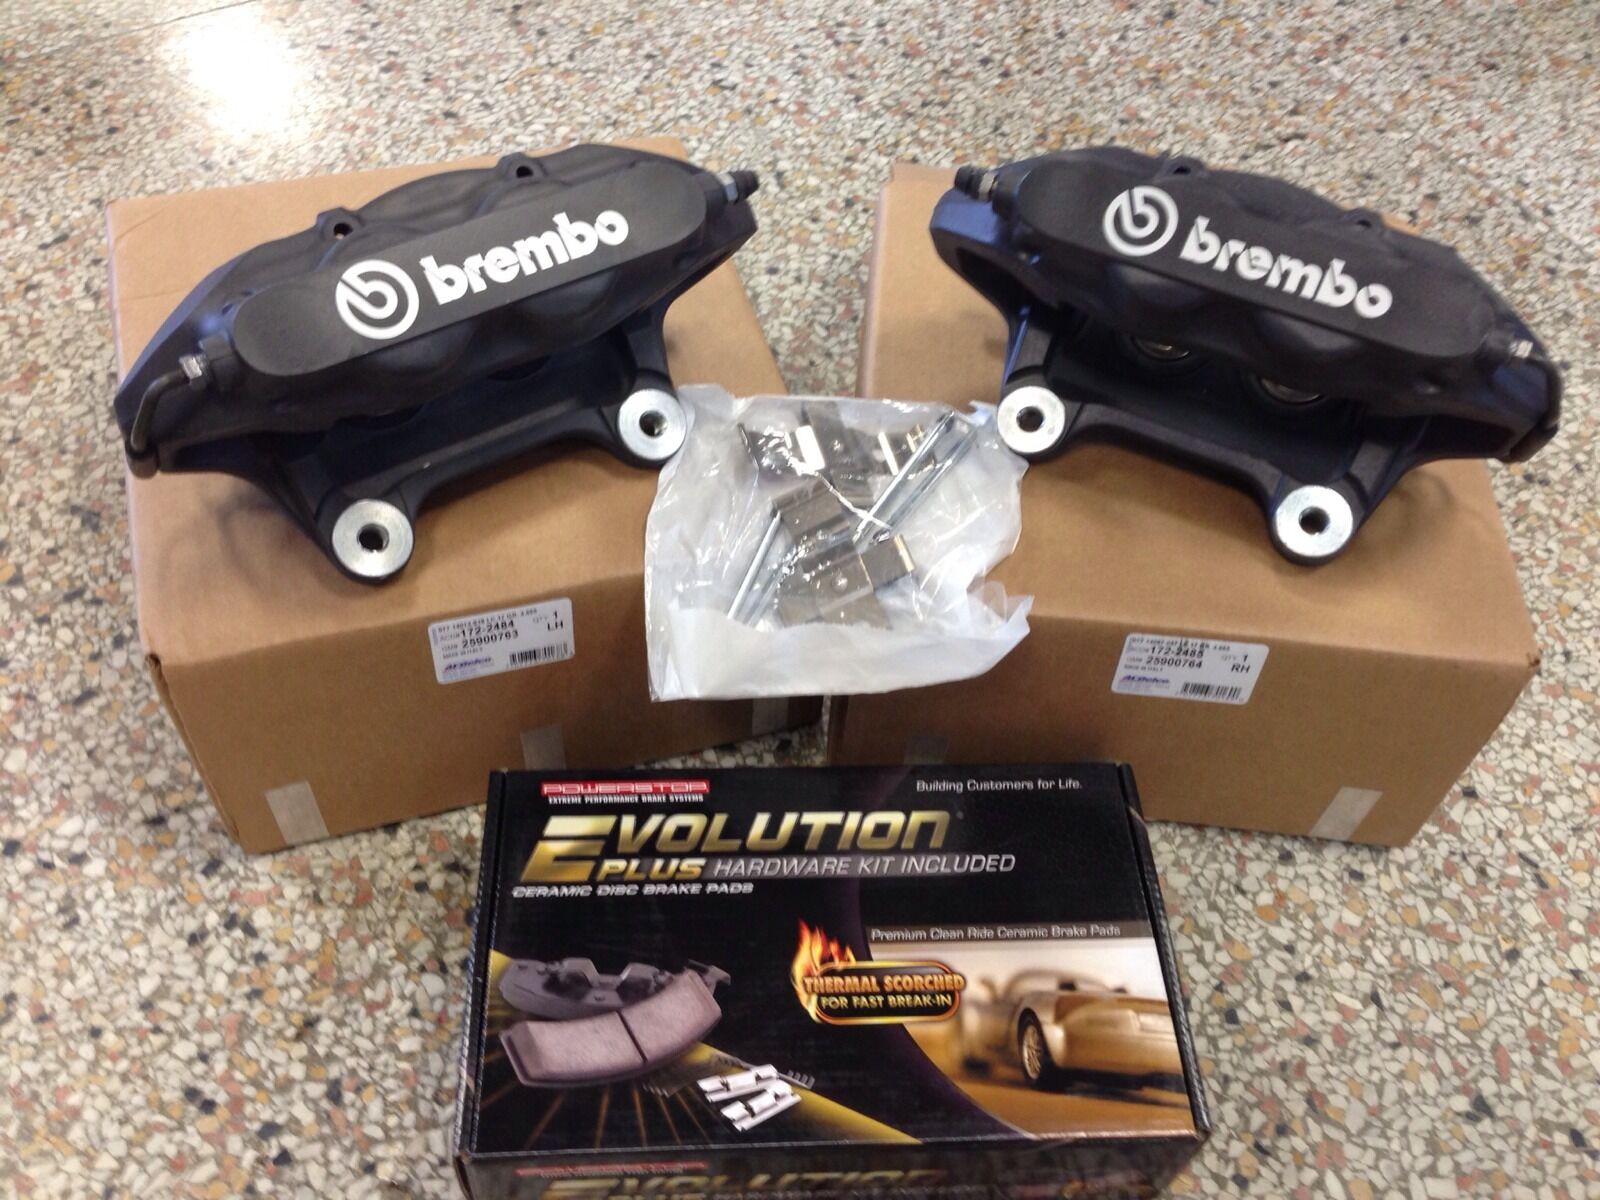 New 2008-10 Chevy Cobalt HHR SS LNF Turbo Brembo Calipers w/ Pads + pin kit